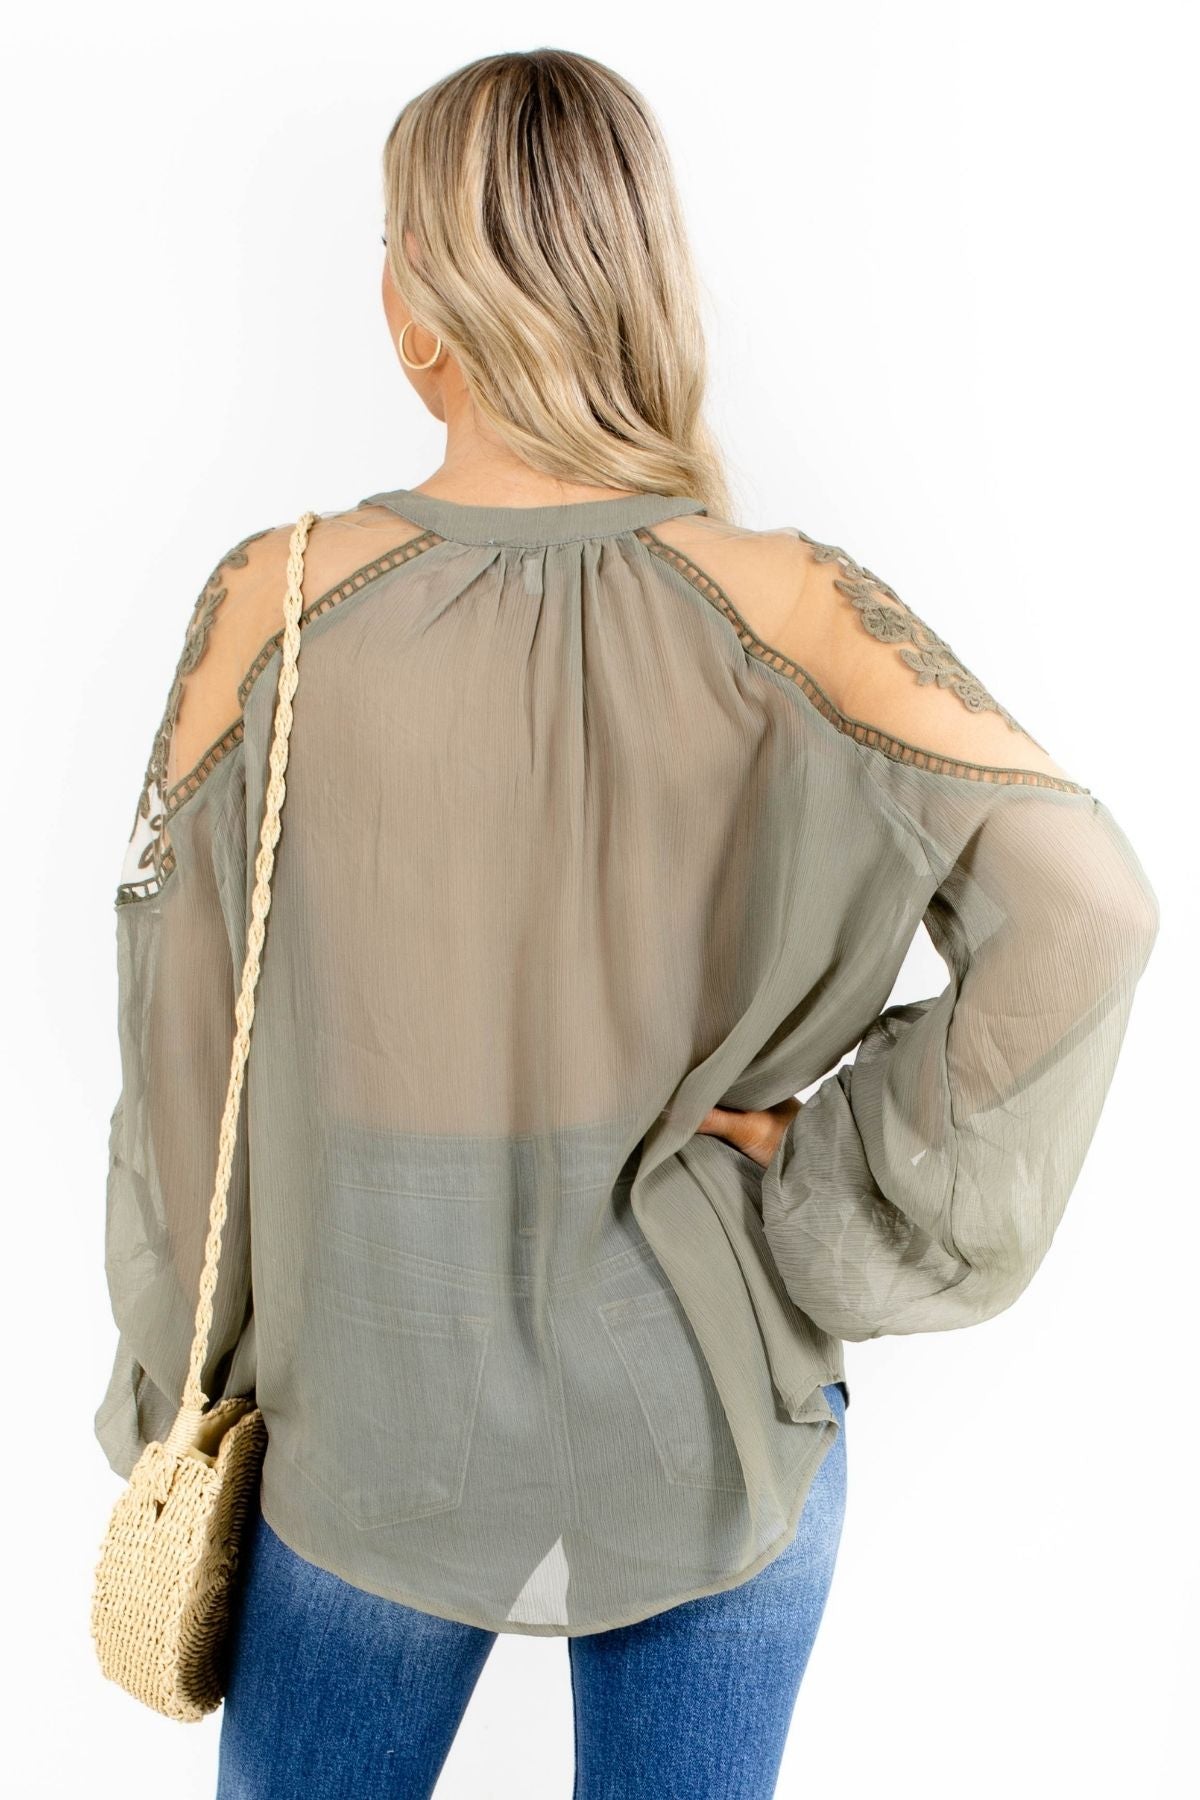 Olive Green Relaxed Fit Sheer Top from Bella Ella Boutique.